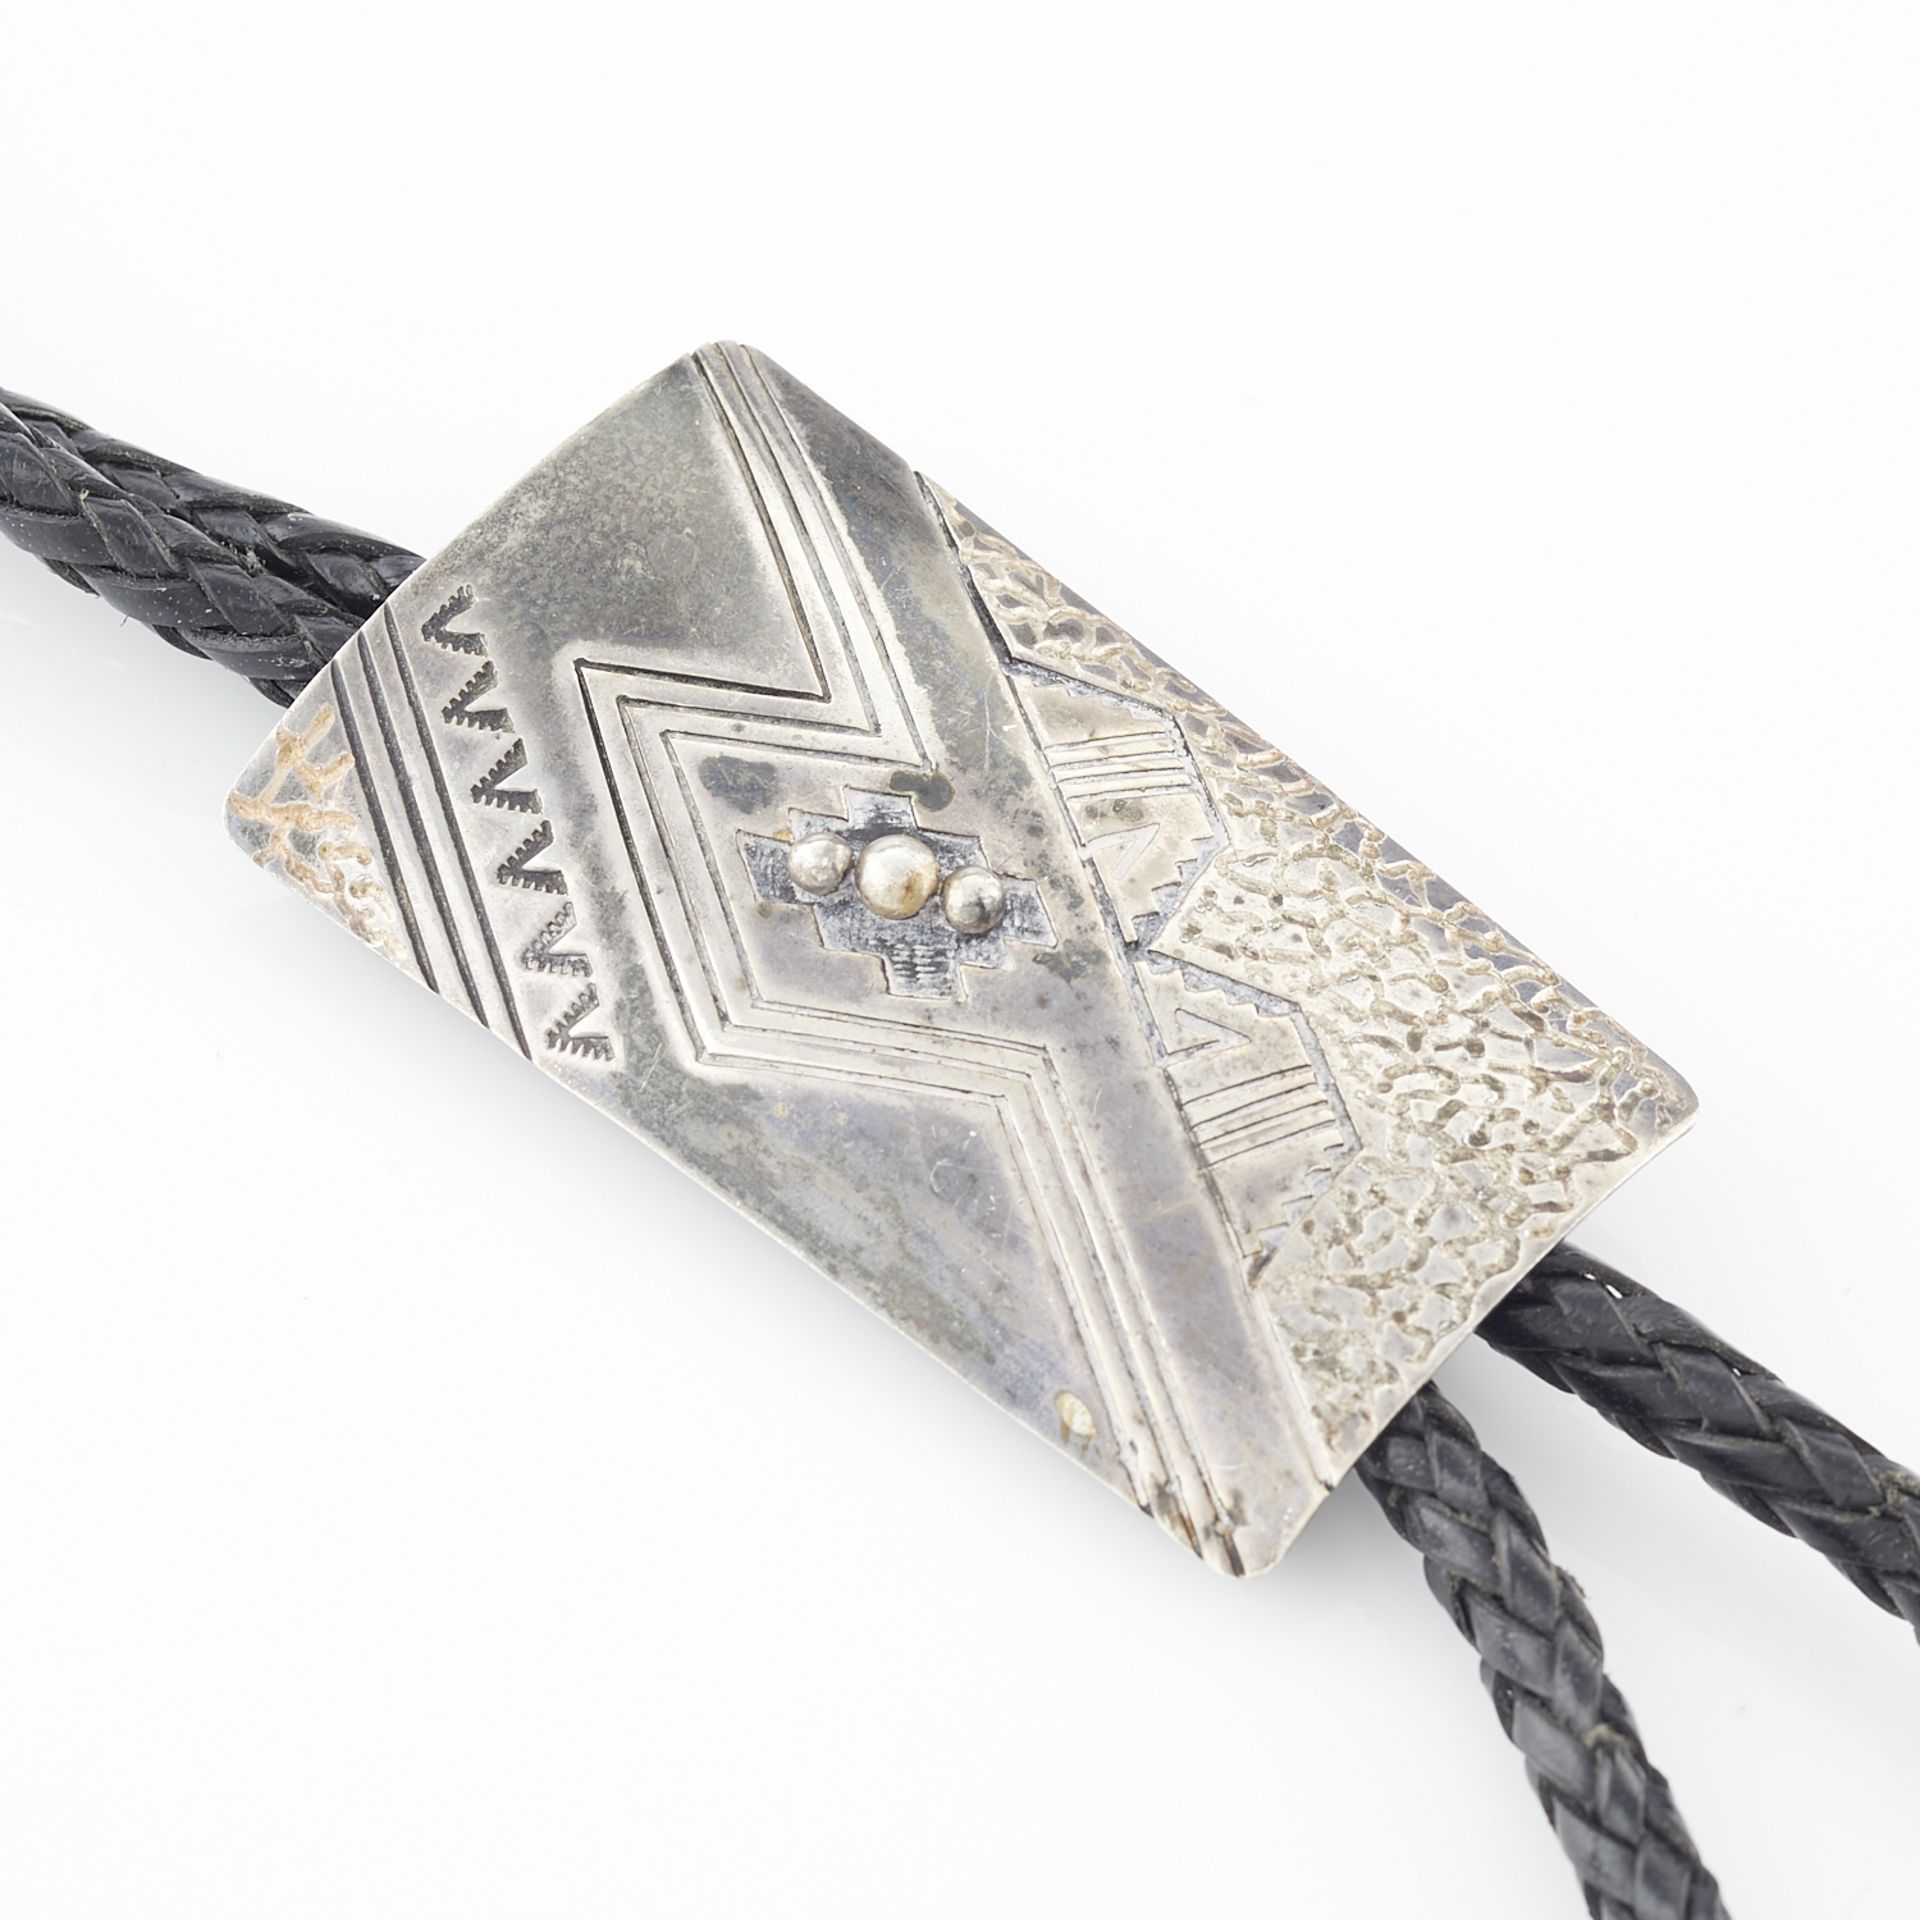 2 Southwest Bolo Ties - Image 8 of 13